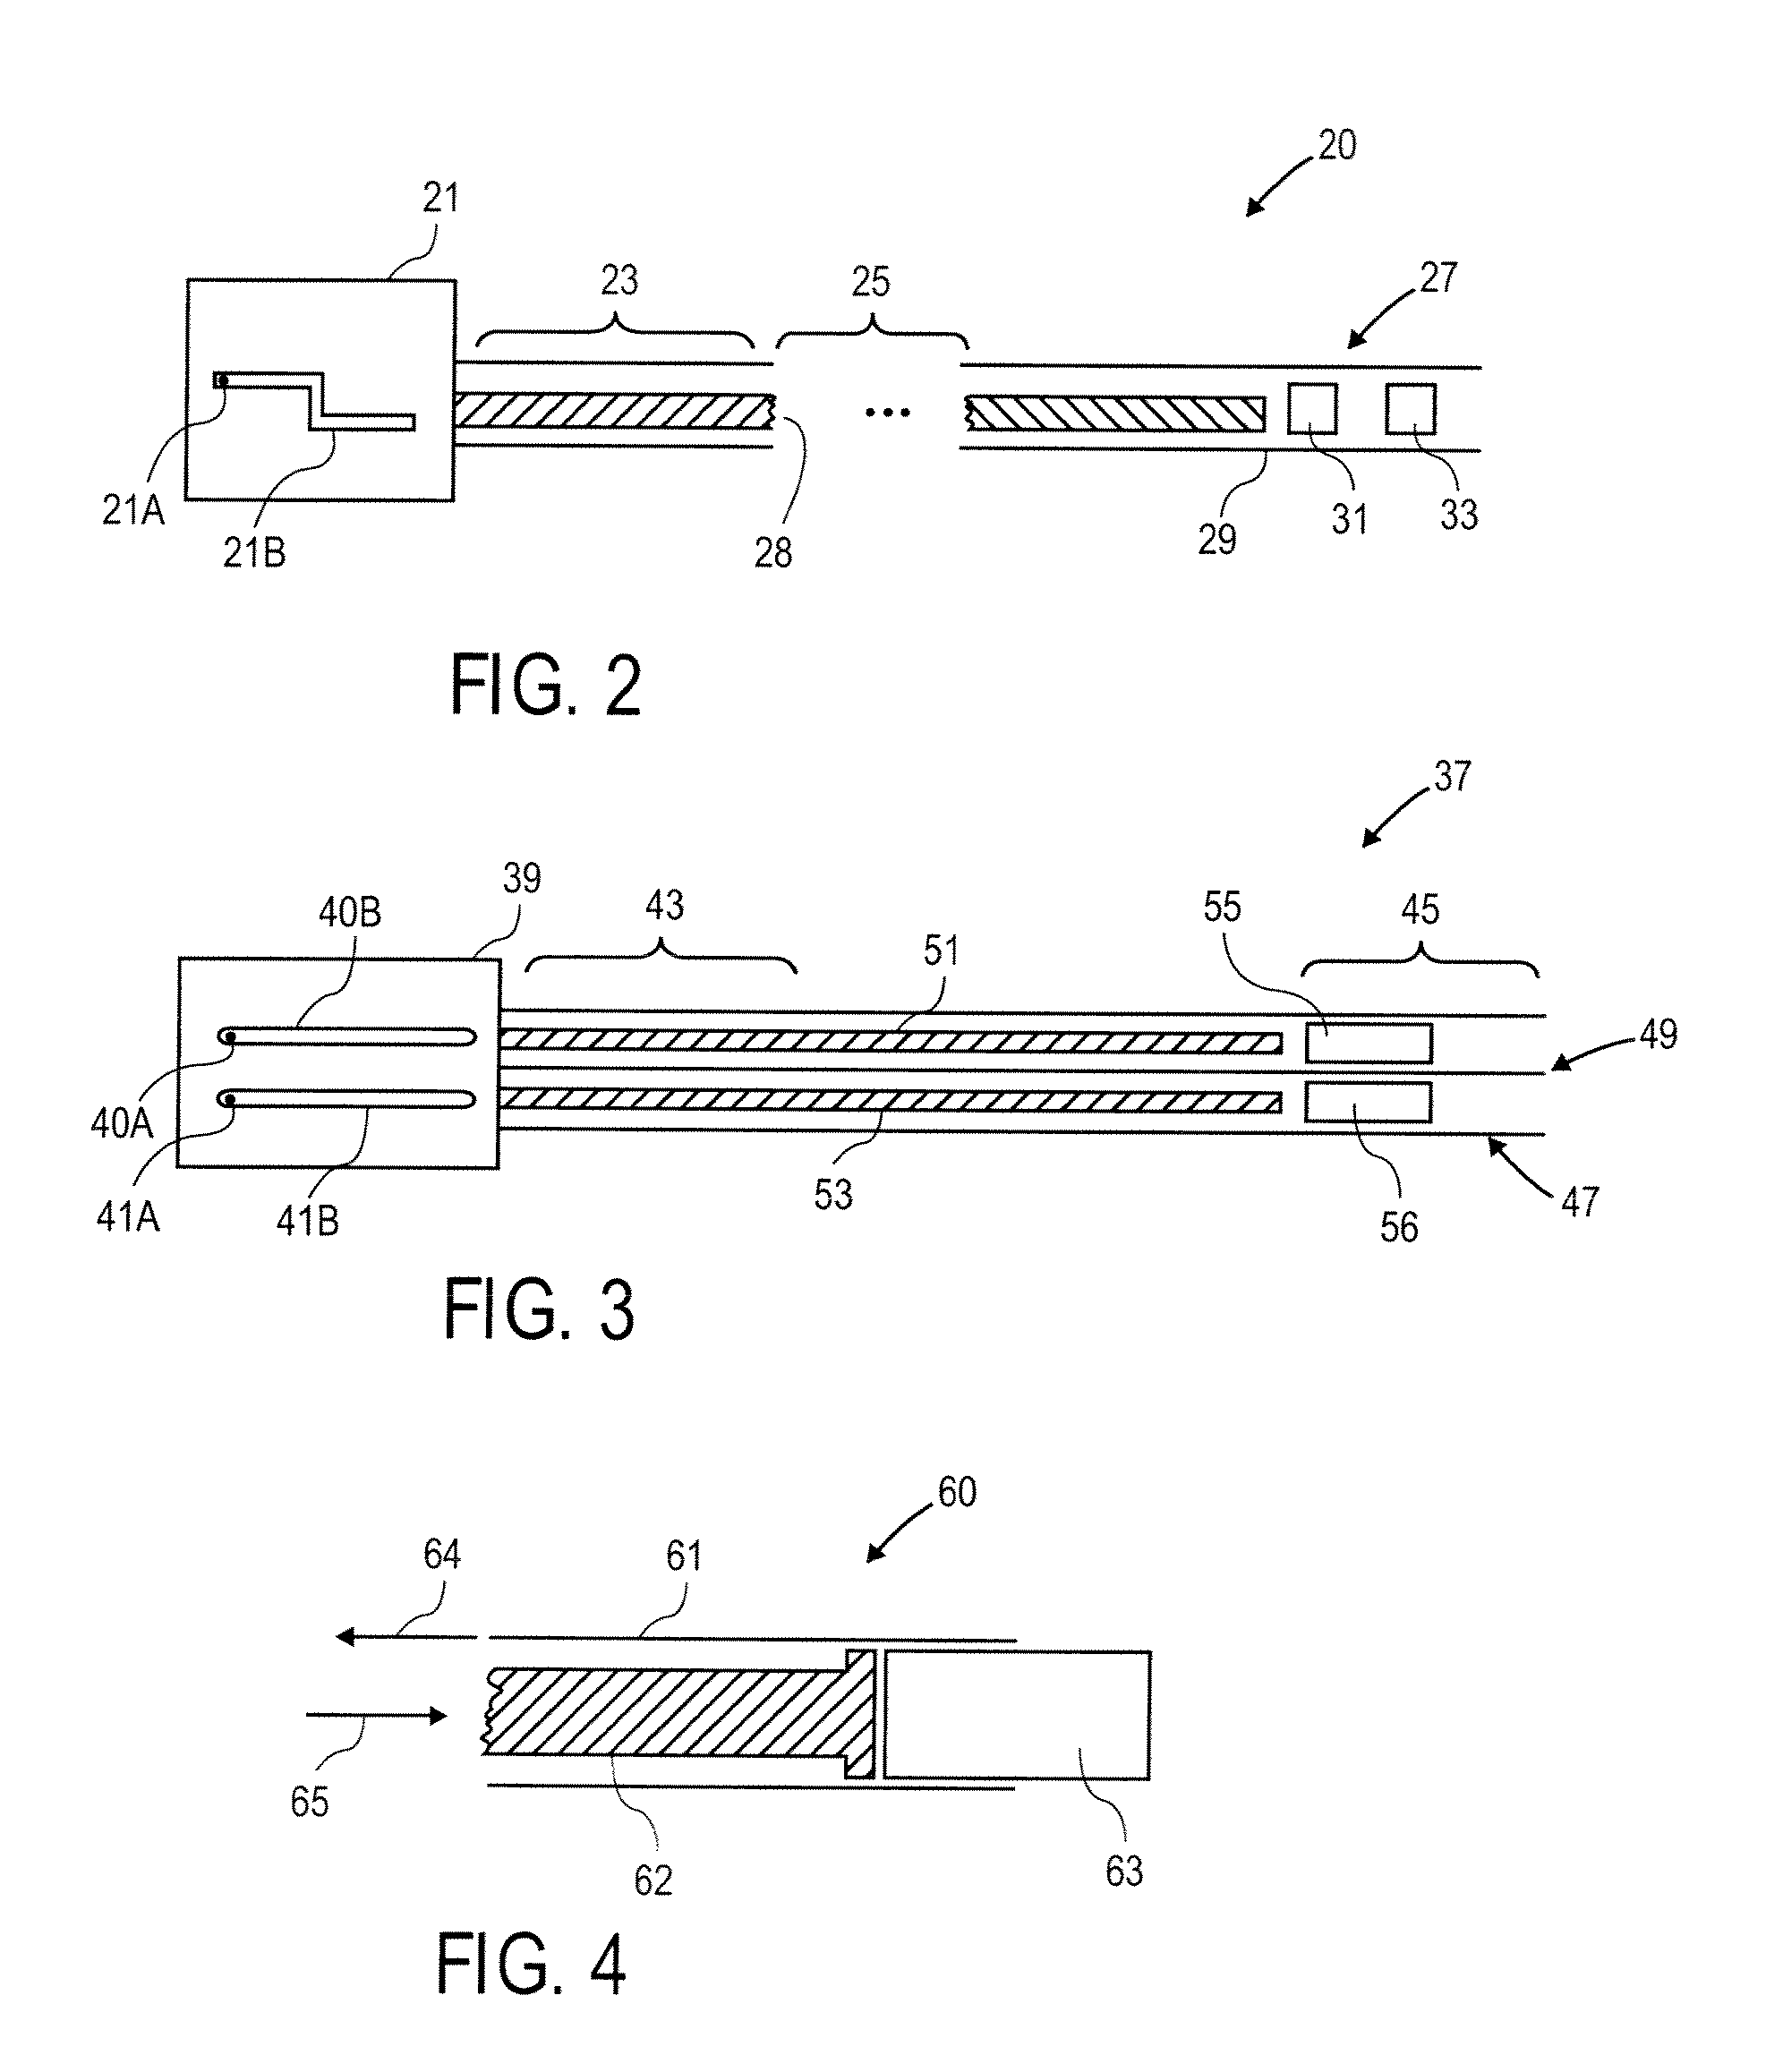 Medical devices and methods of making and using such devices